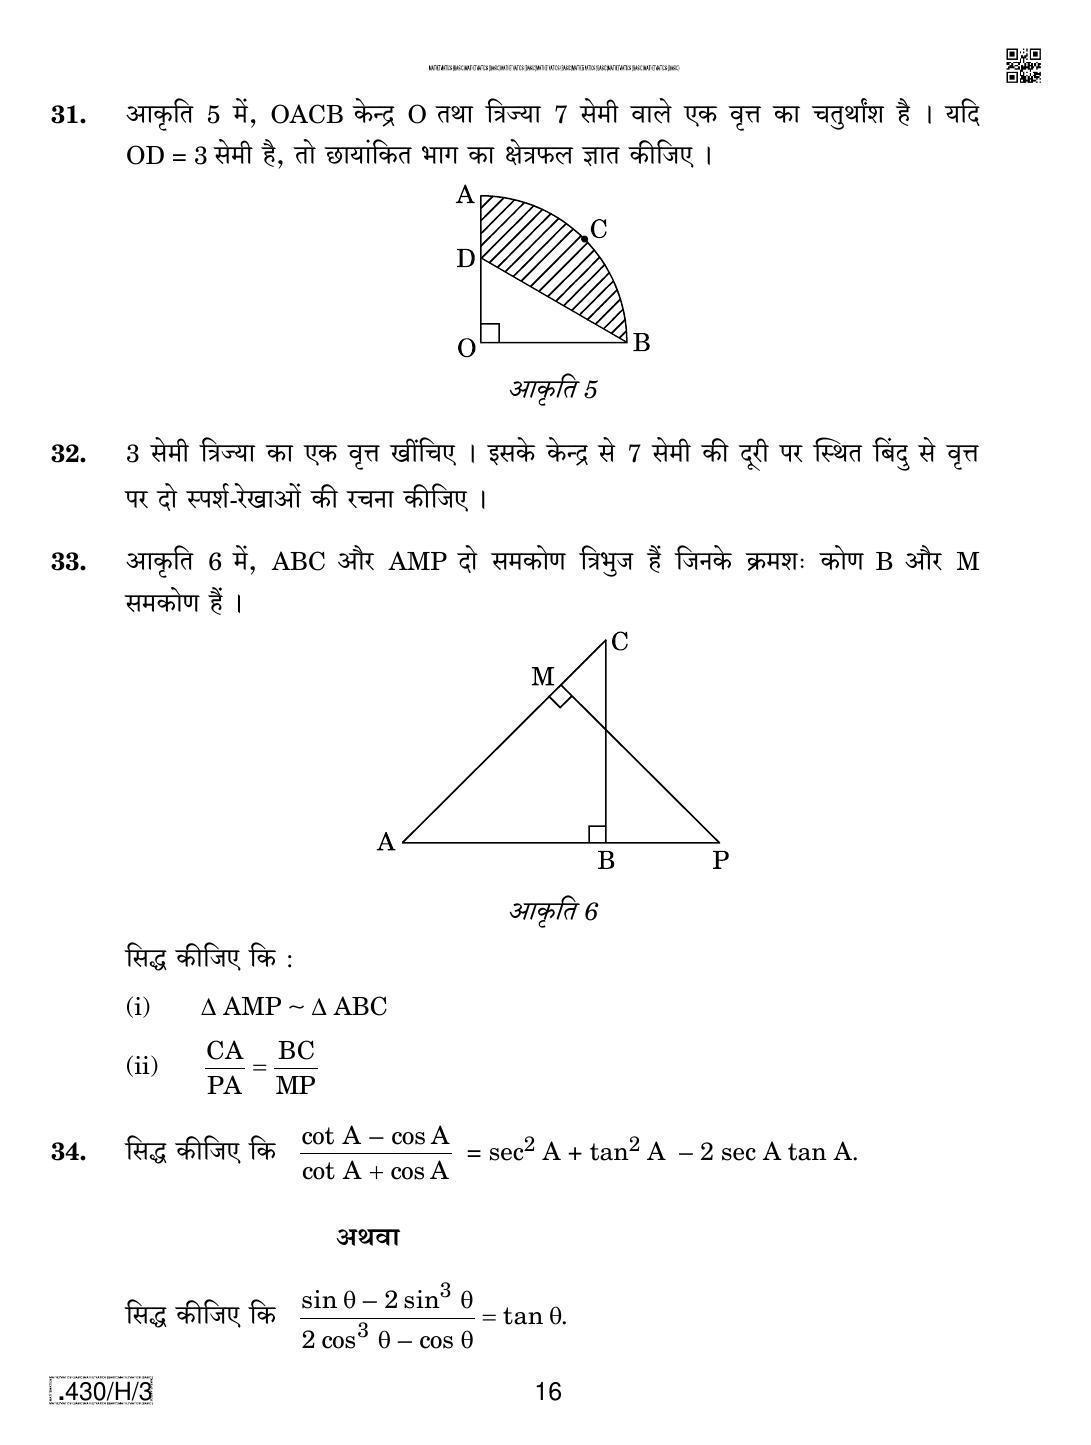 CBSE Class 10 430-C-3 - Maths (Basic) 2020 Compartment Question Paper - Page 16